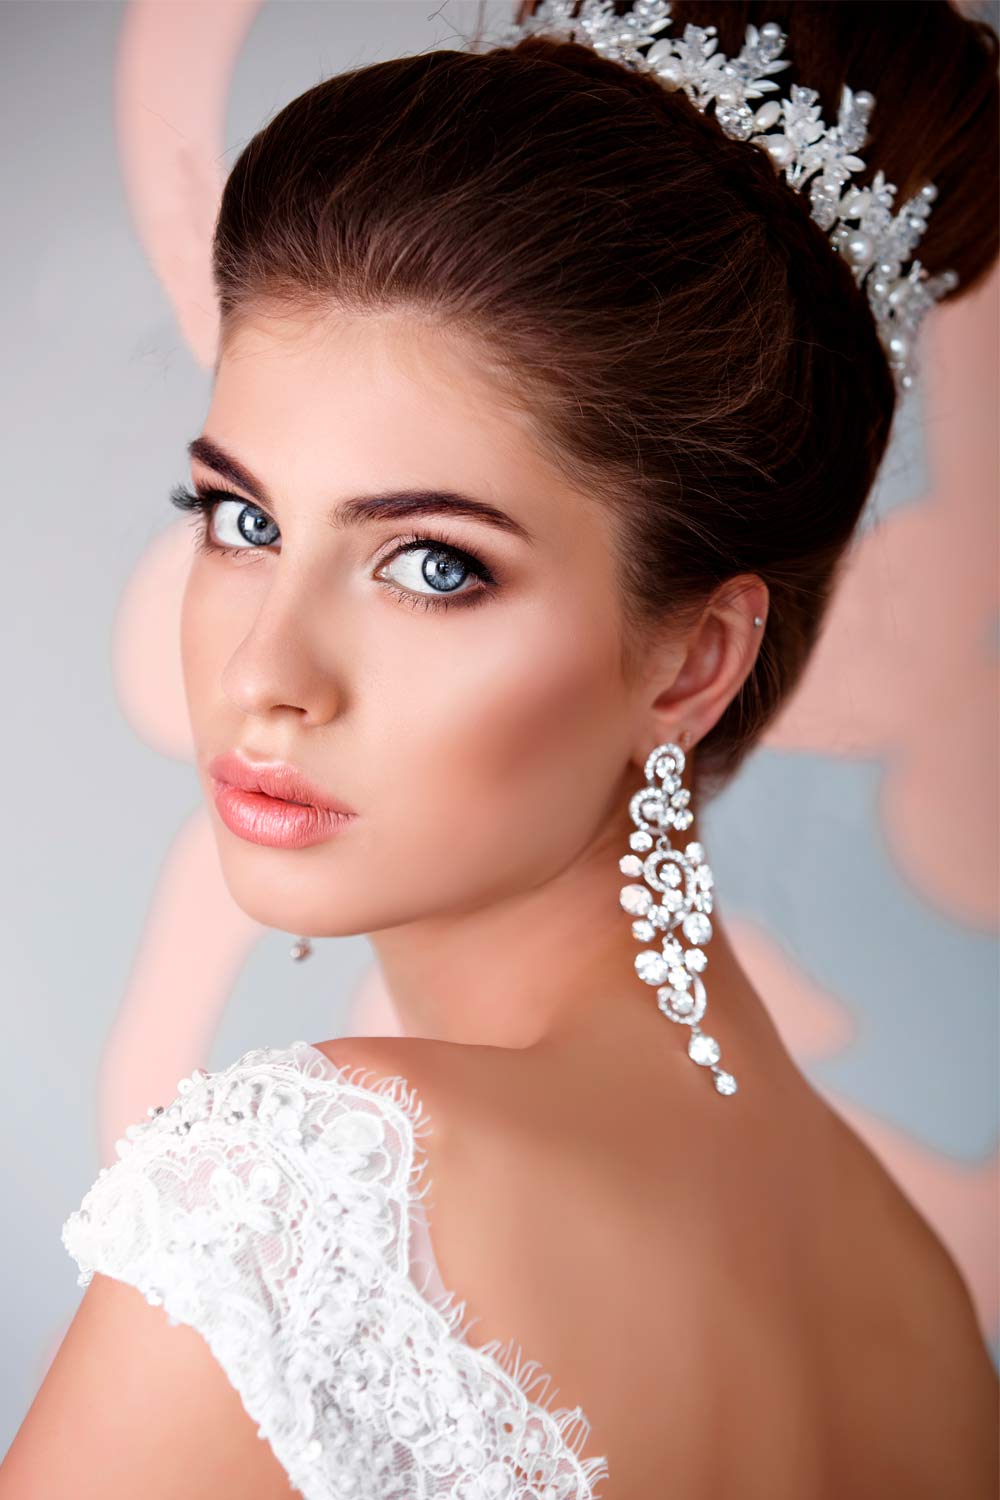 How To Prepare Your Skin For Wedding Makeup